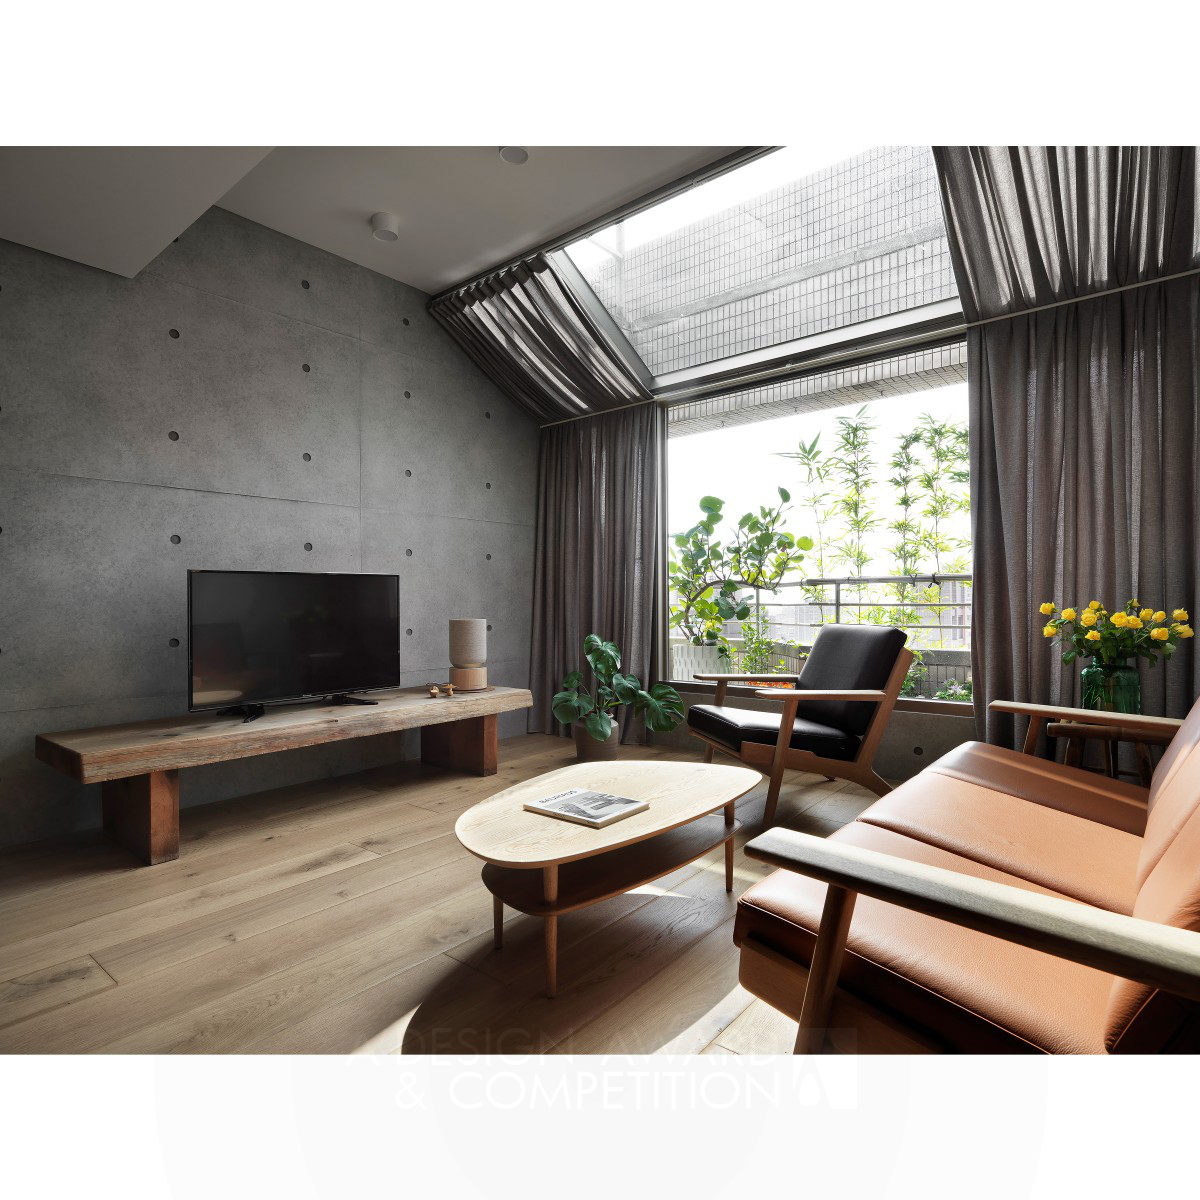 Live with Benevolence Residential Space by Hsu Fu Chu